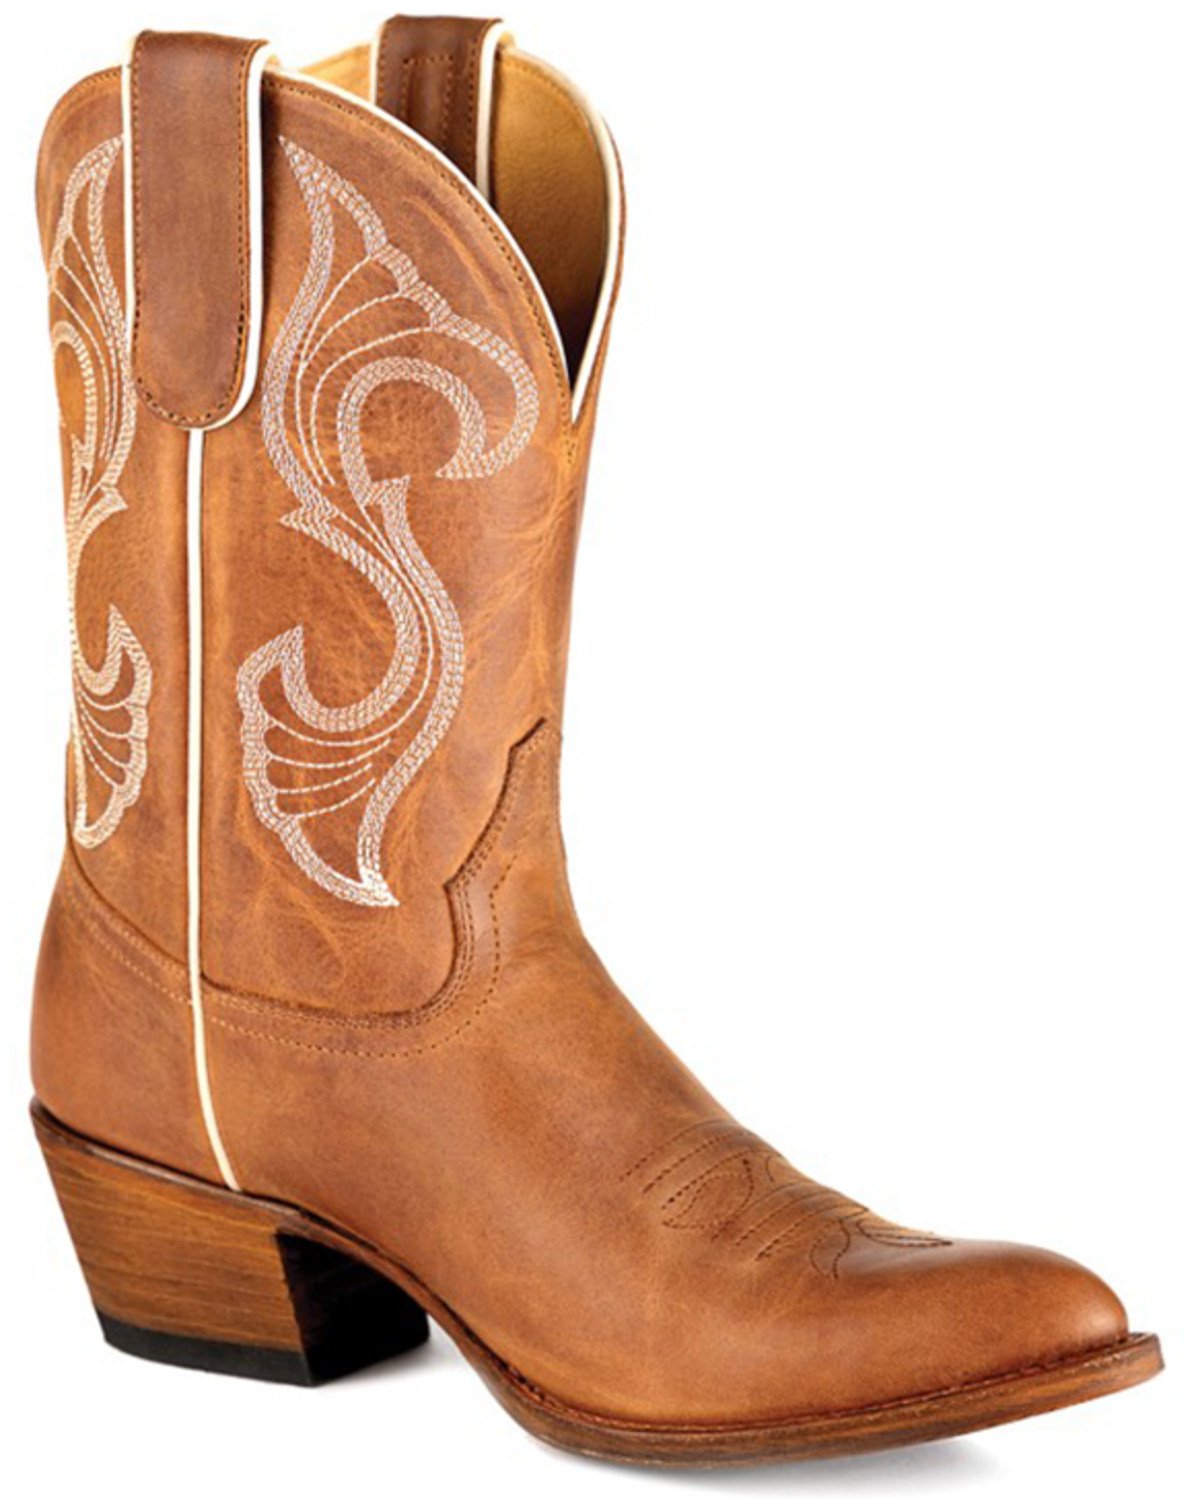 Macie Bean Women's Hot To Trot Western Boots - Round Toe